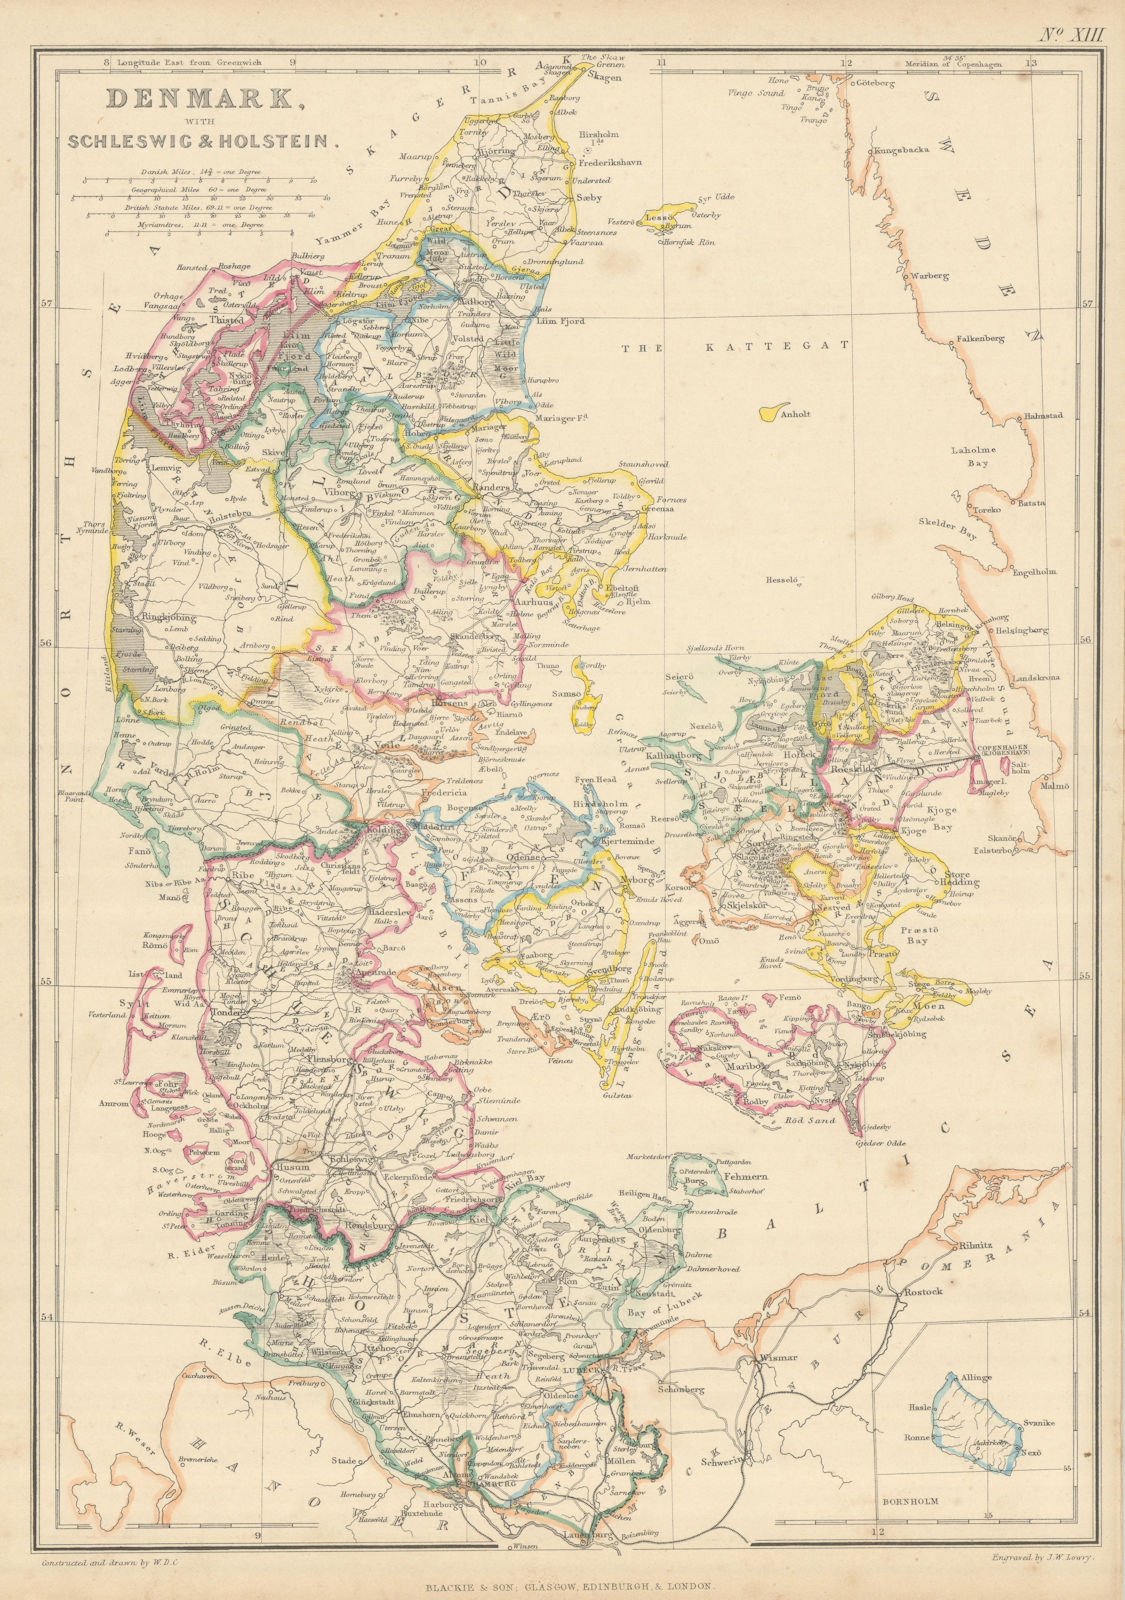 Associate Product Denmark, with Schleswig & Holstein by Joseph Wilson Lowry 1860 old antique map